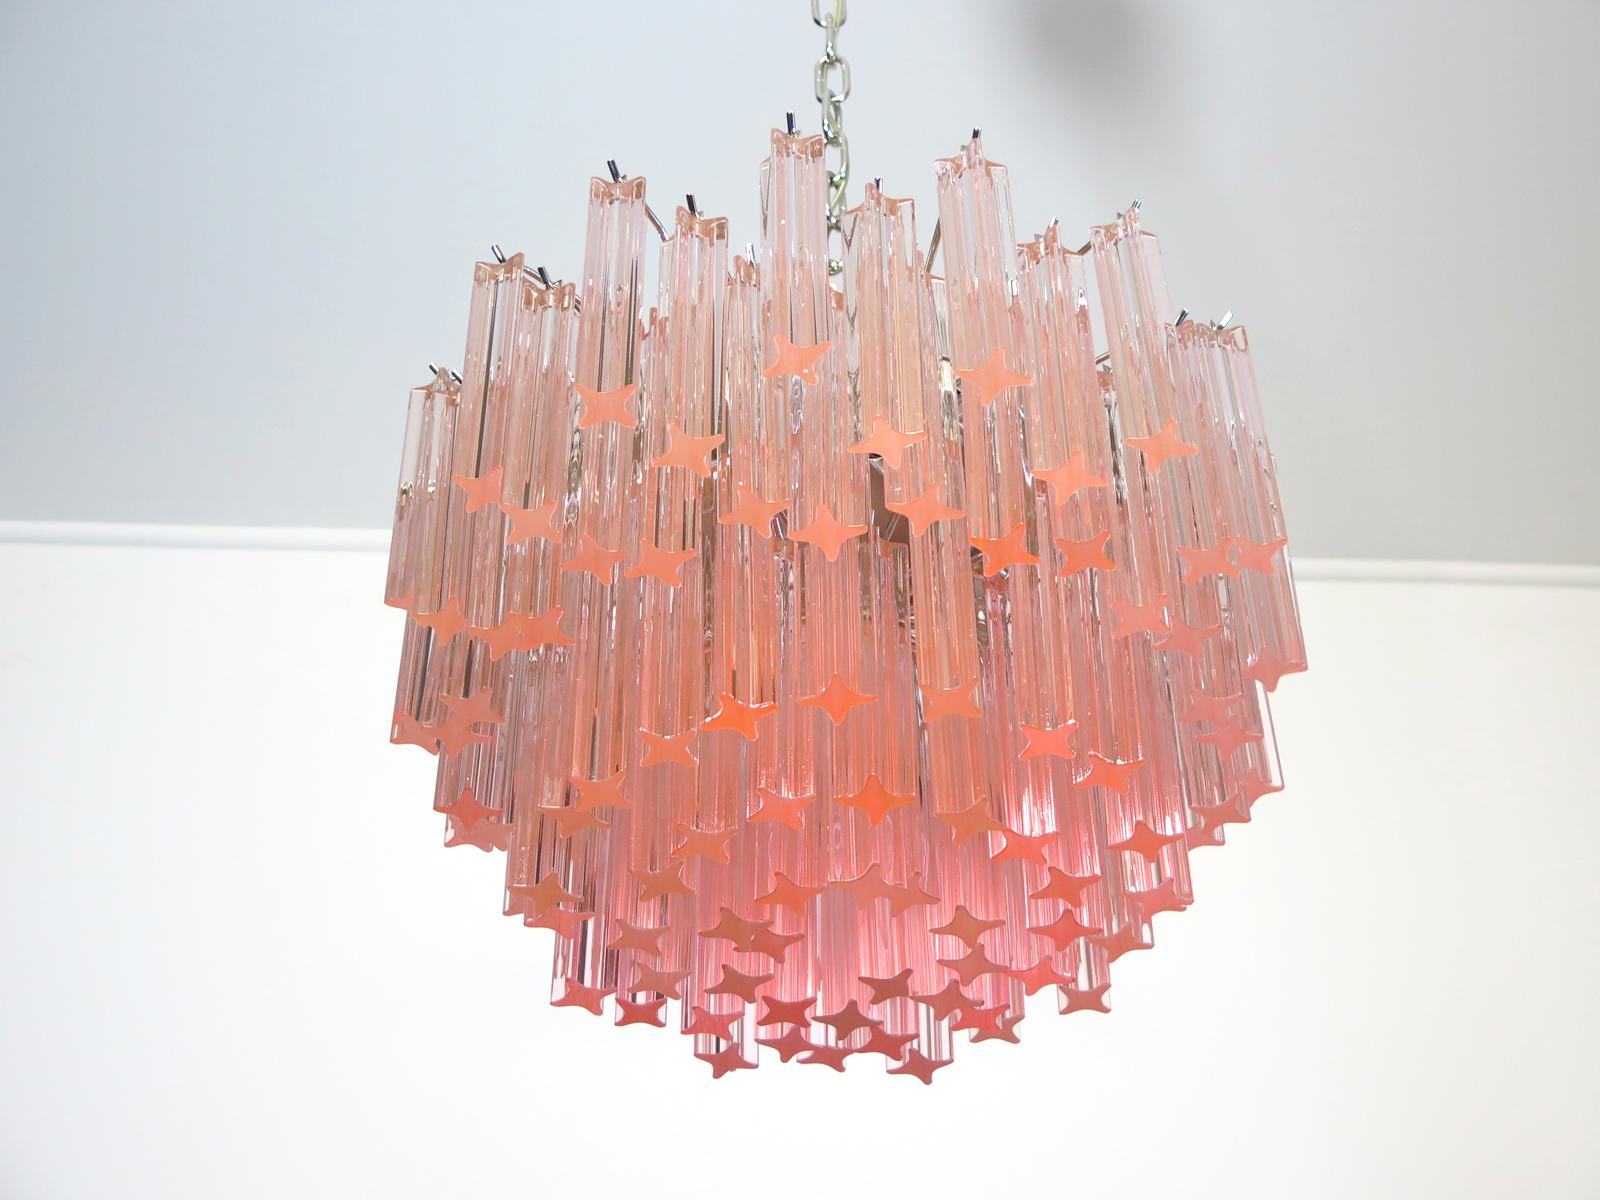 Fantastic vintage Murano chandelier made by 107 Murano crystal prism quadriedri in a nickel metal frame. The glass has a slightly pink color.
Period: 1980s
Dimensions: 45.25 inches height (115 cm) with chain; 15.75 inches height (40 cm) without